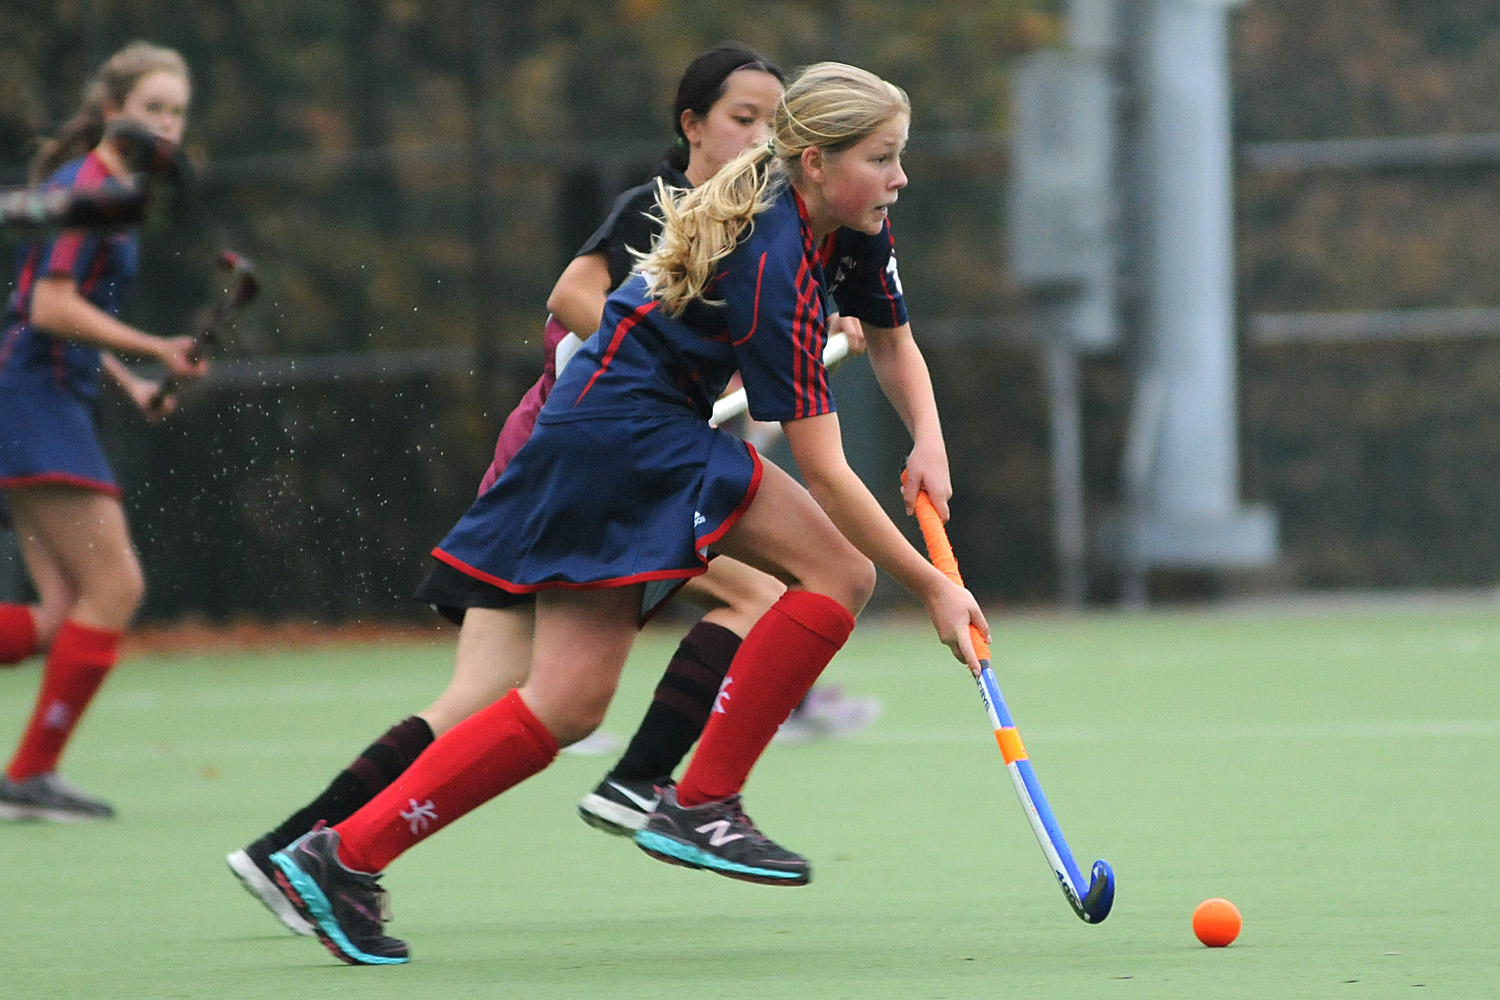 A Positive Change: New Uniforms for Girls' Field Hockey and